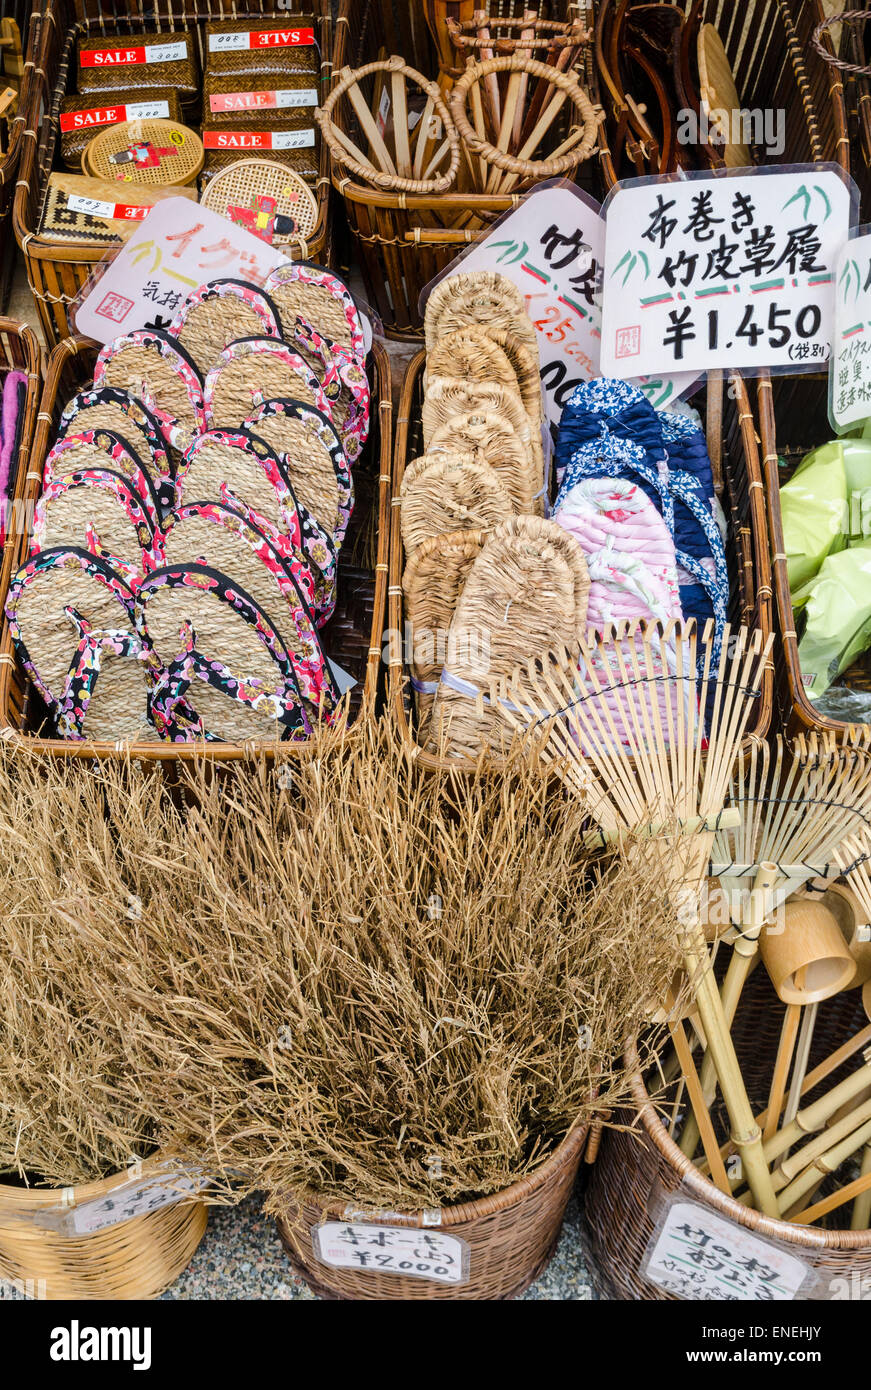 Shop selling traditional Japanese wooden craft and products in Kyoto, Japan Stock Photo